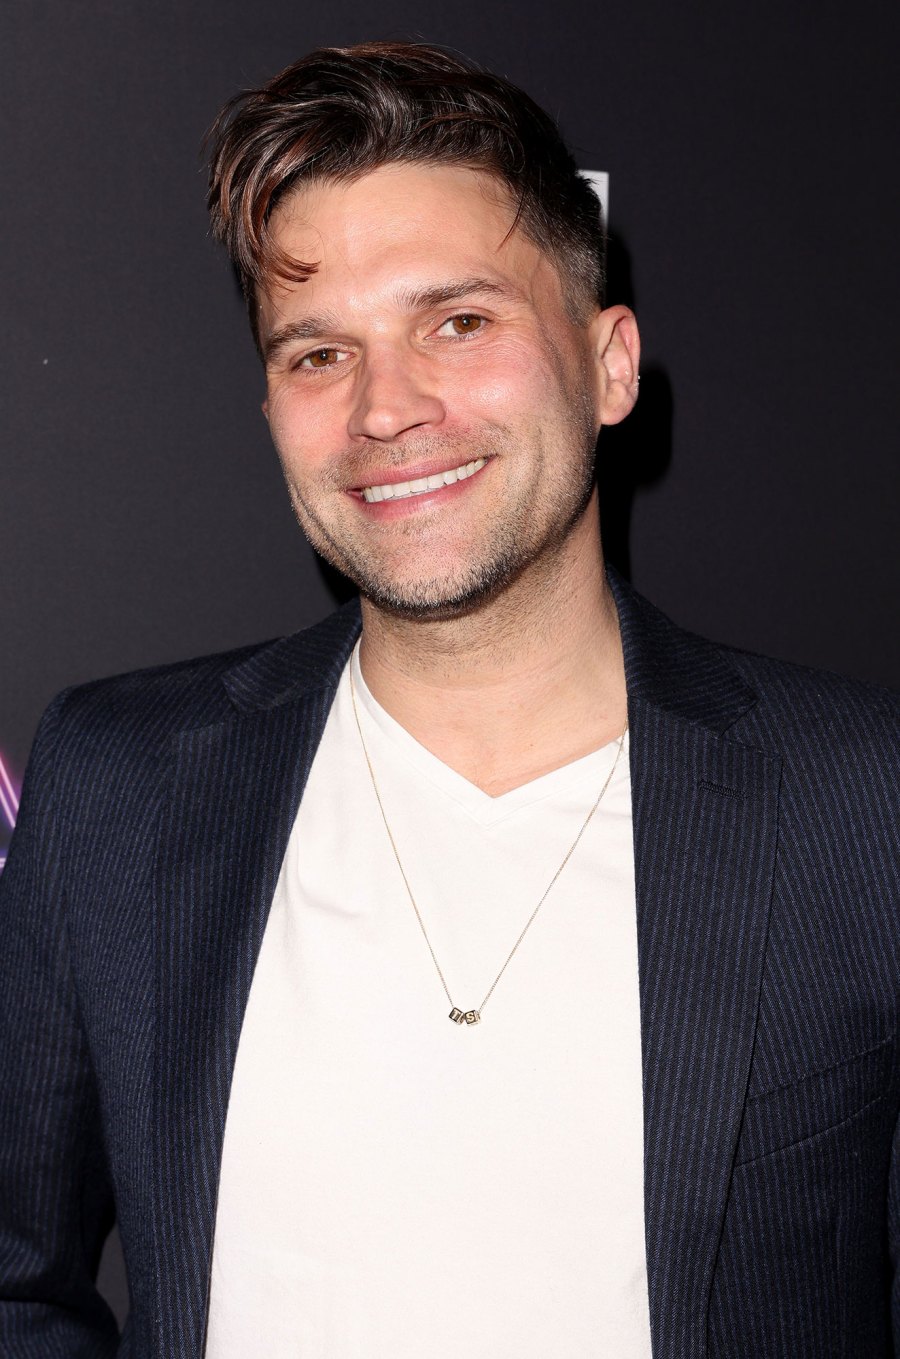 Tom Schwartz Who Did Raquel Leviss Makeout With at Coachella